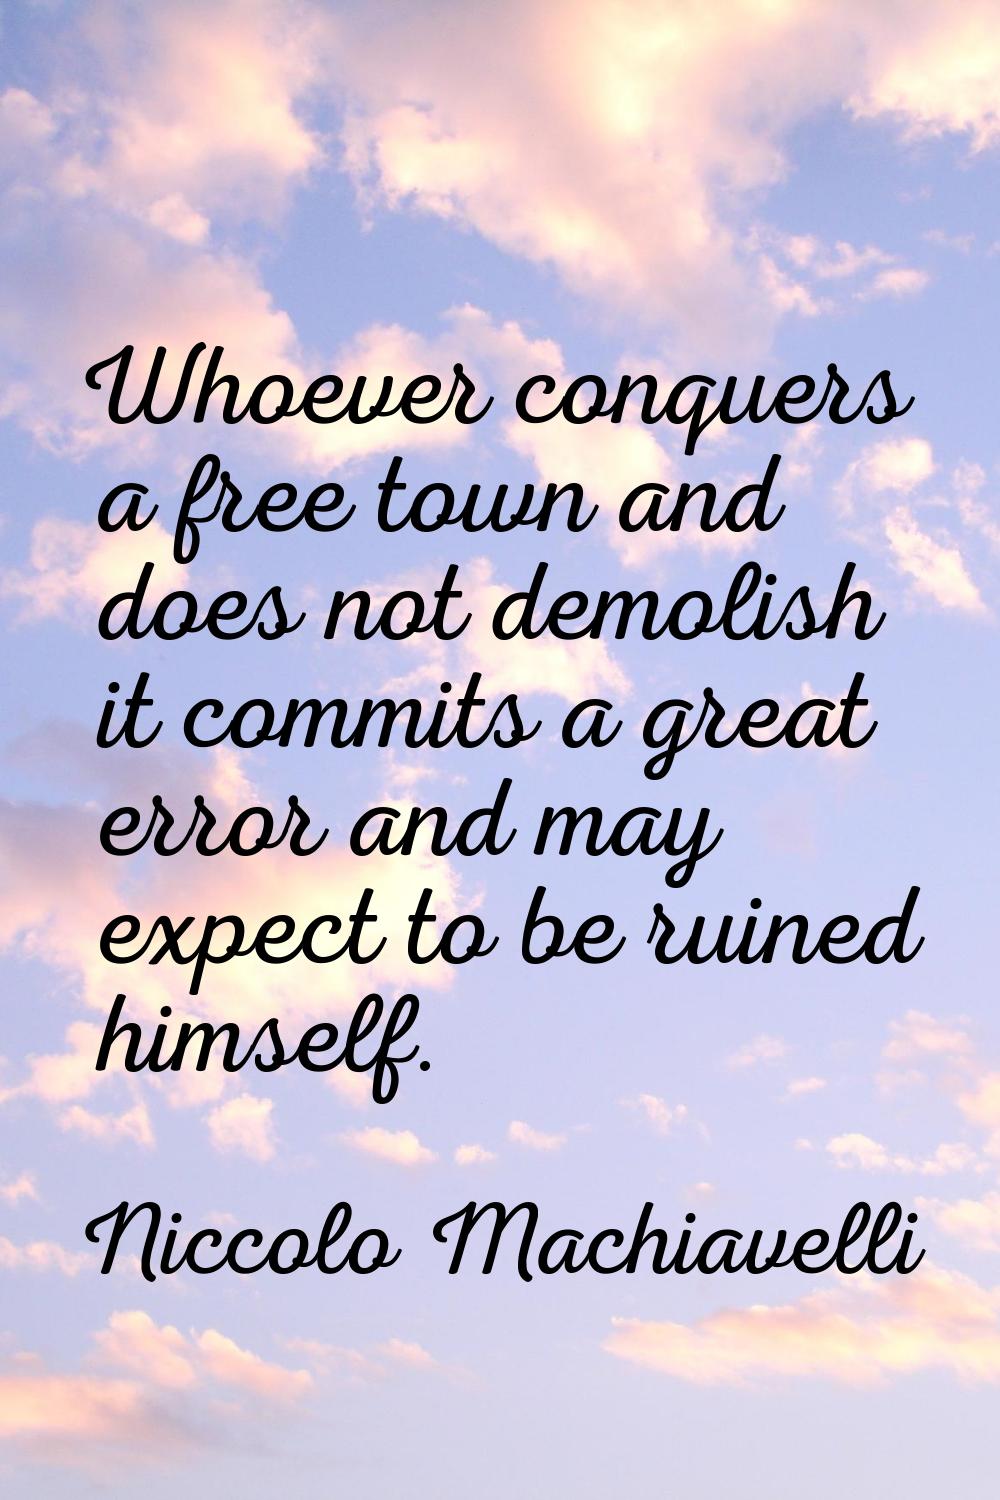 Whoever conquers a free town and does not demolish it commits a great error and may expect to be ru